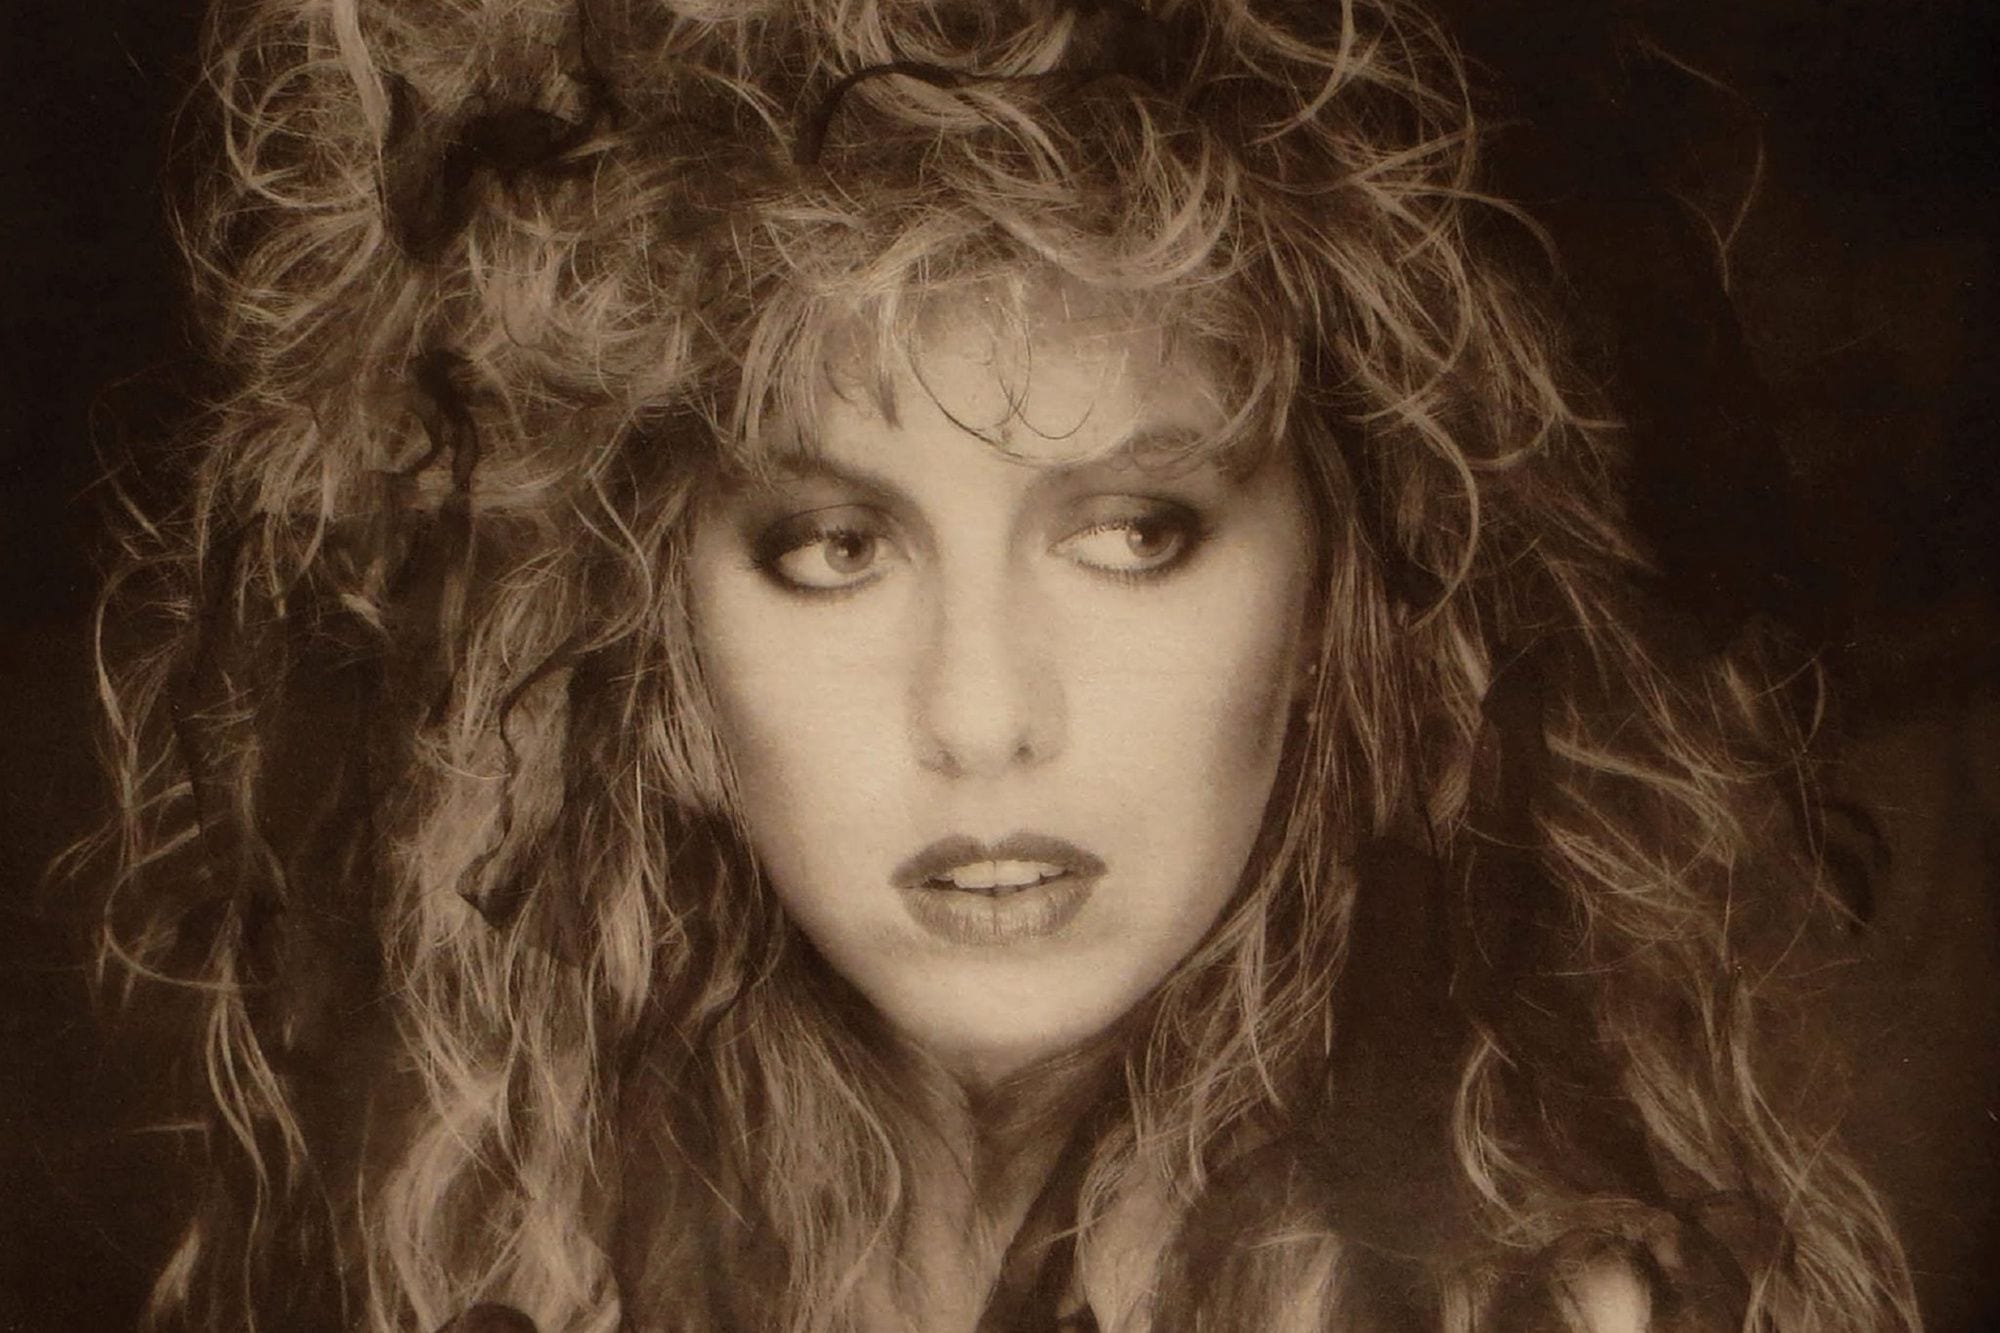 Judie Tzuke’s ‘The Chrysalis Recordings’ Highlights Her Early ‘80s Transition to Synthpop